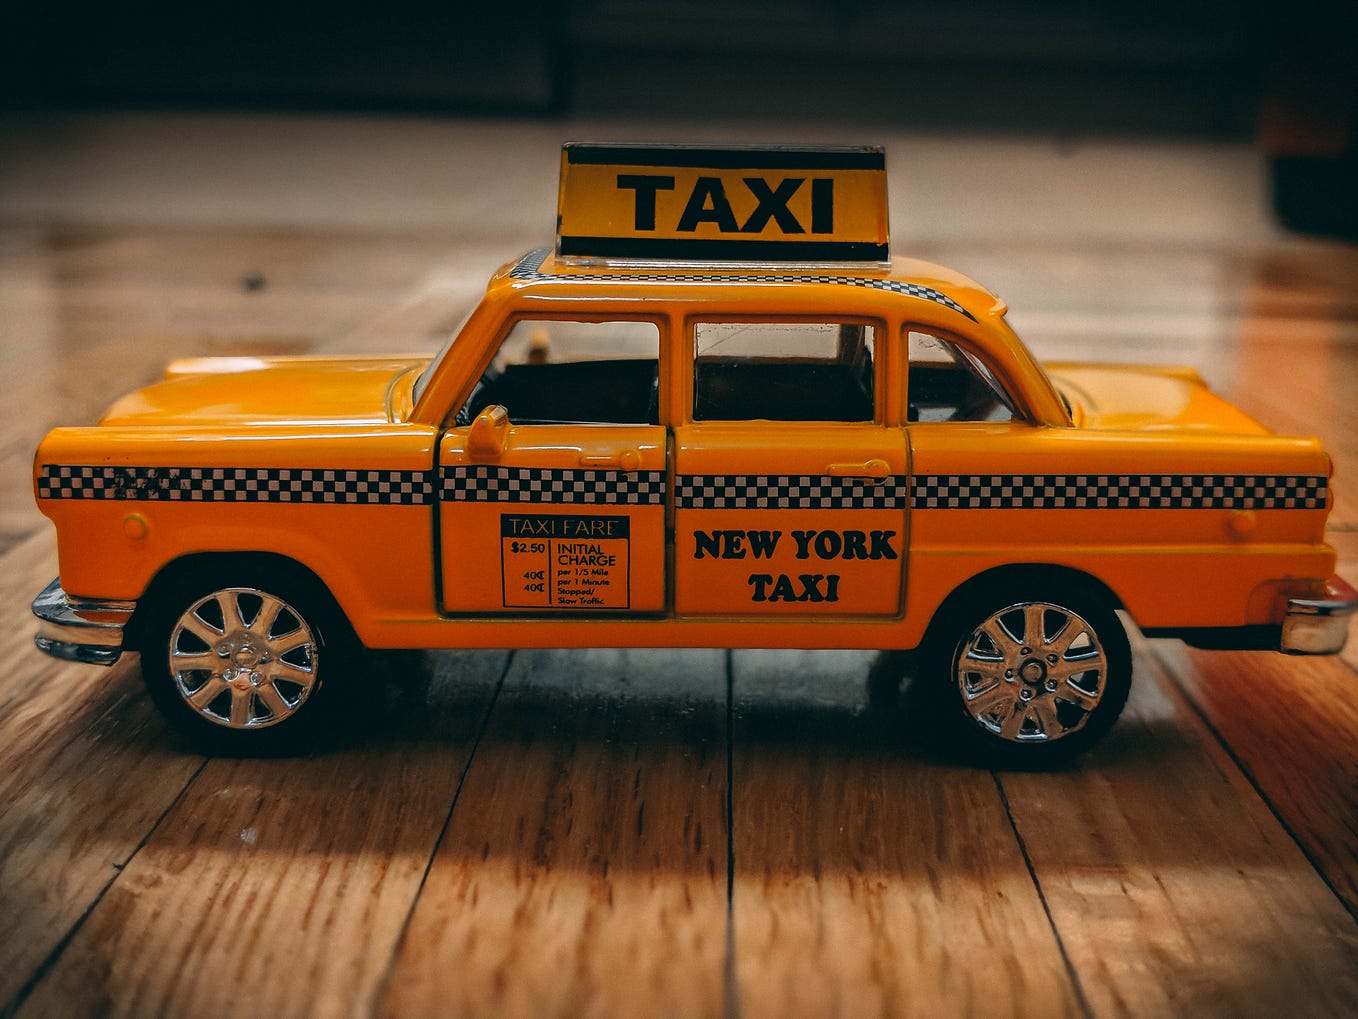 Build taxi booking app like Uber